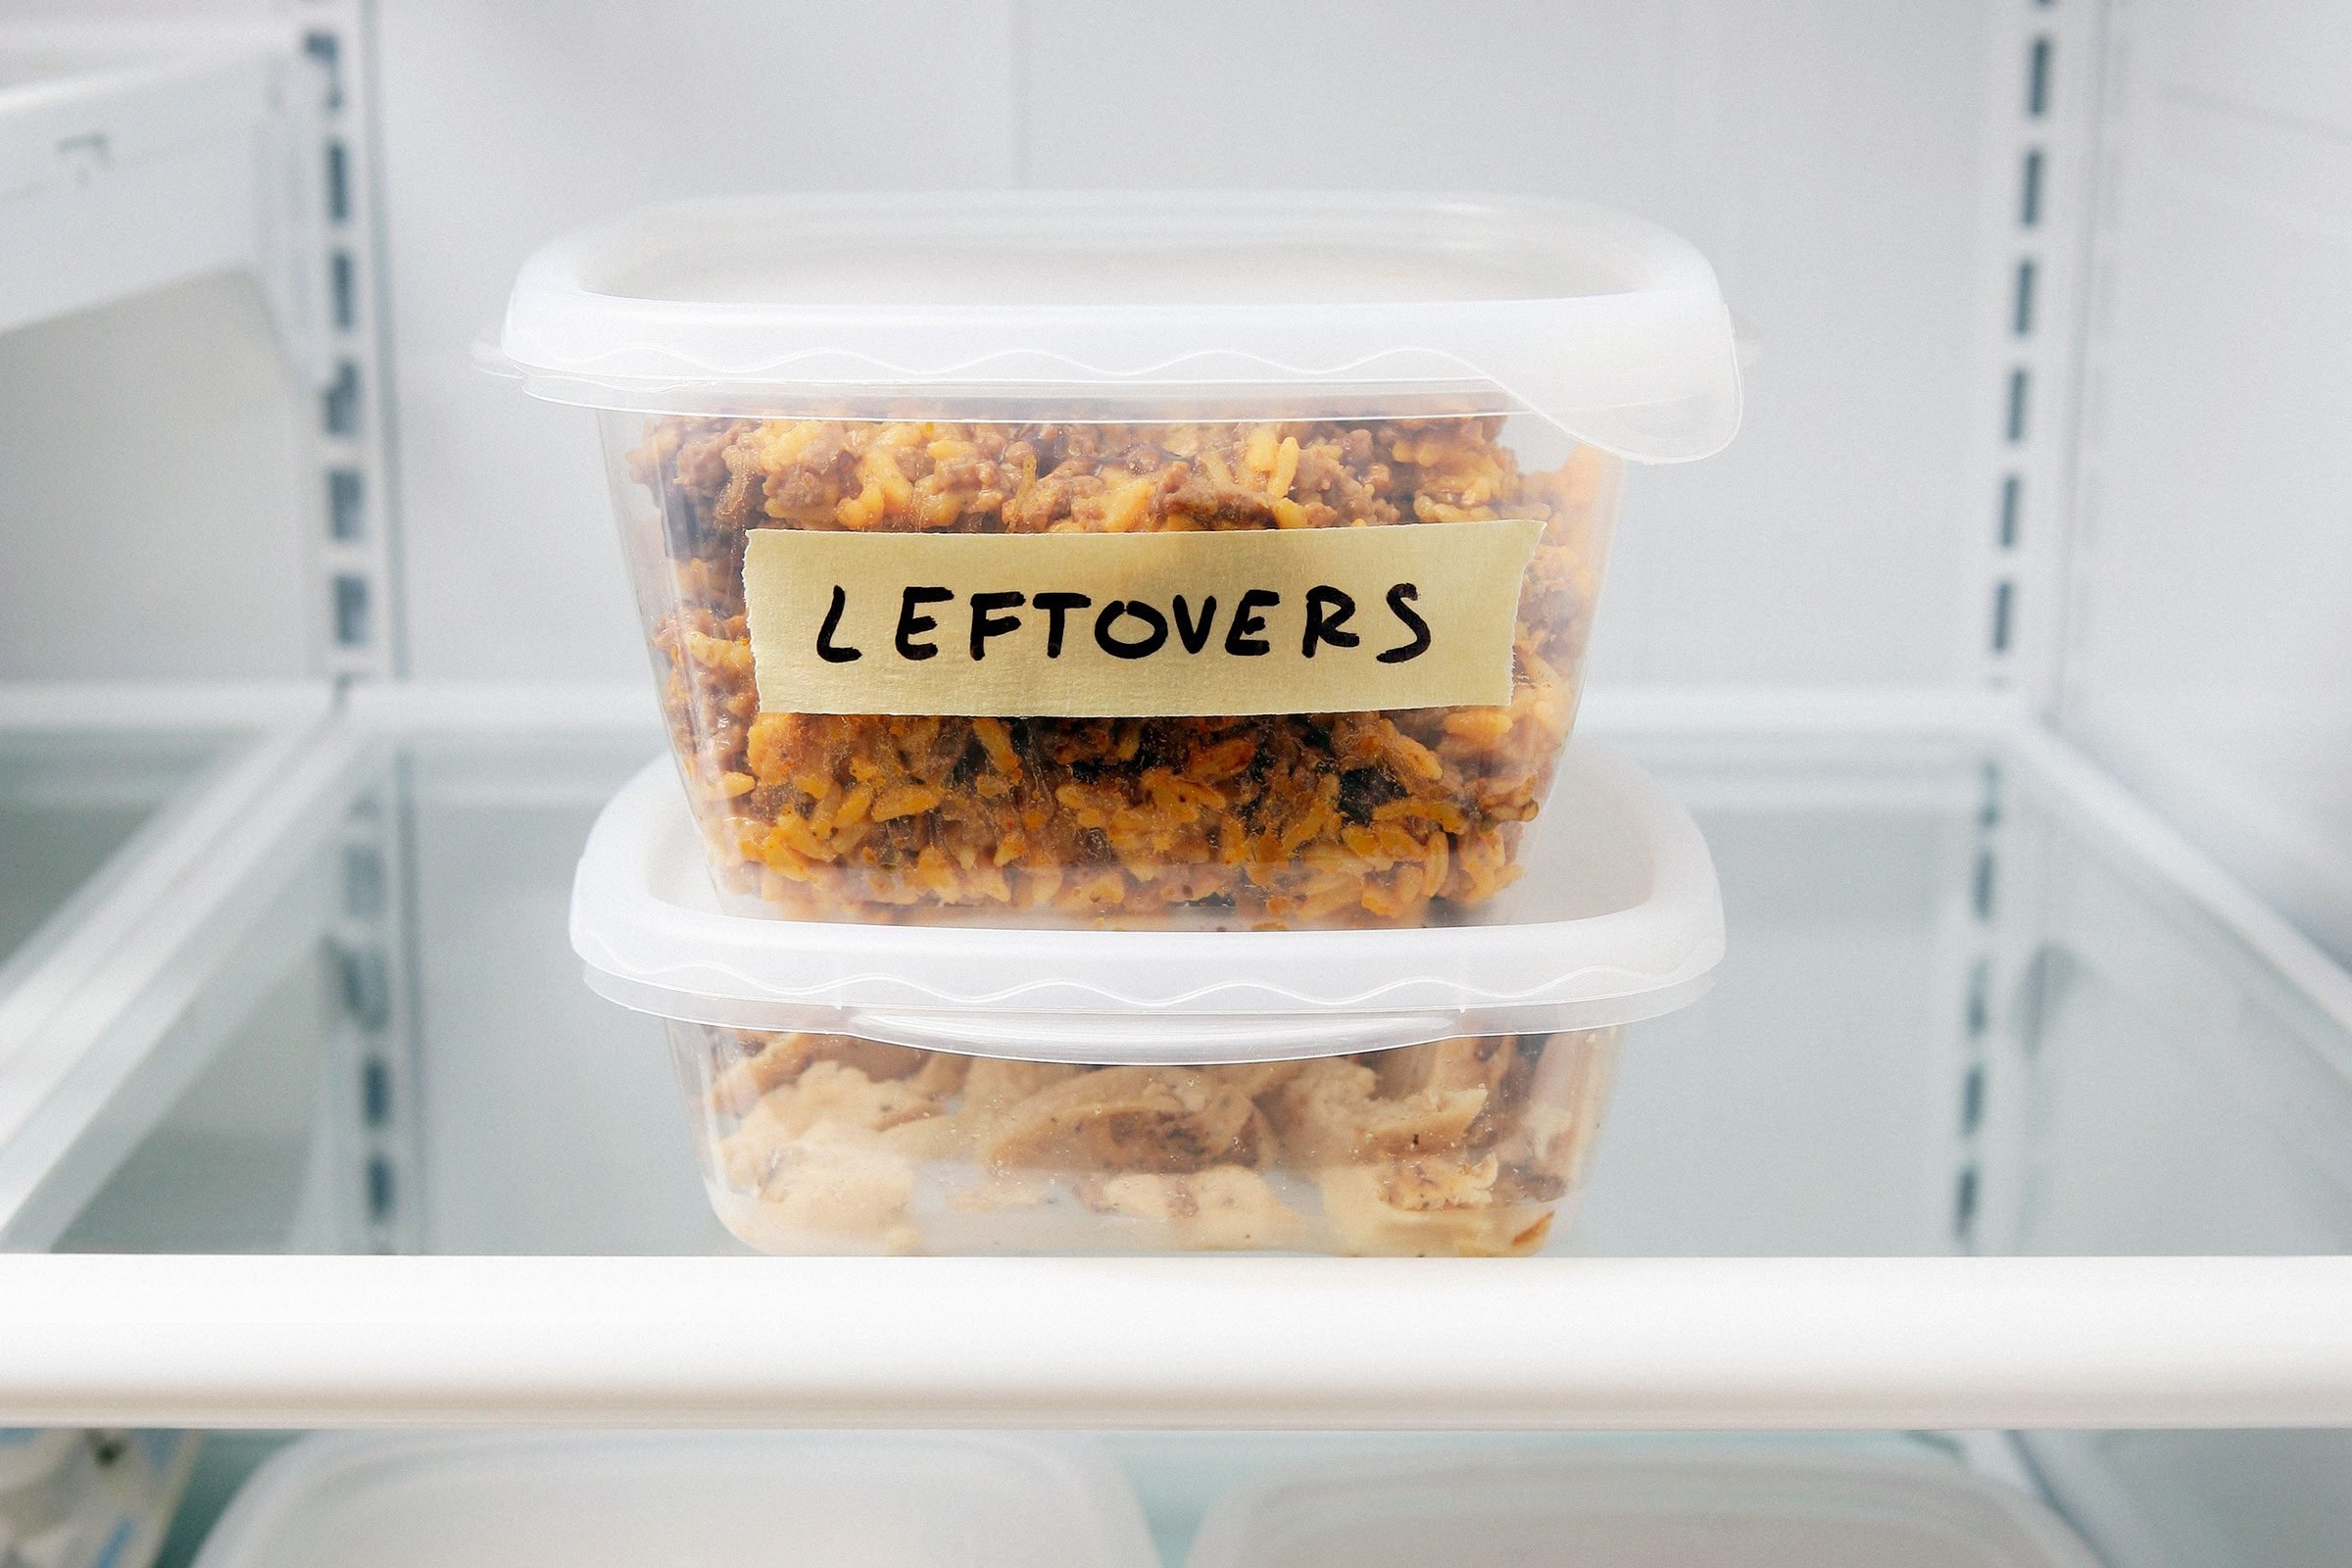 https://www.rd.com/wp-content/uploads/2022/10/leftovers-in-the-fridge-GettyImages-96322287.jpg?fit=700%2C1024